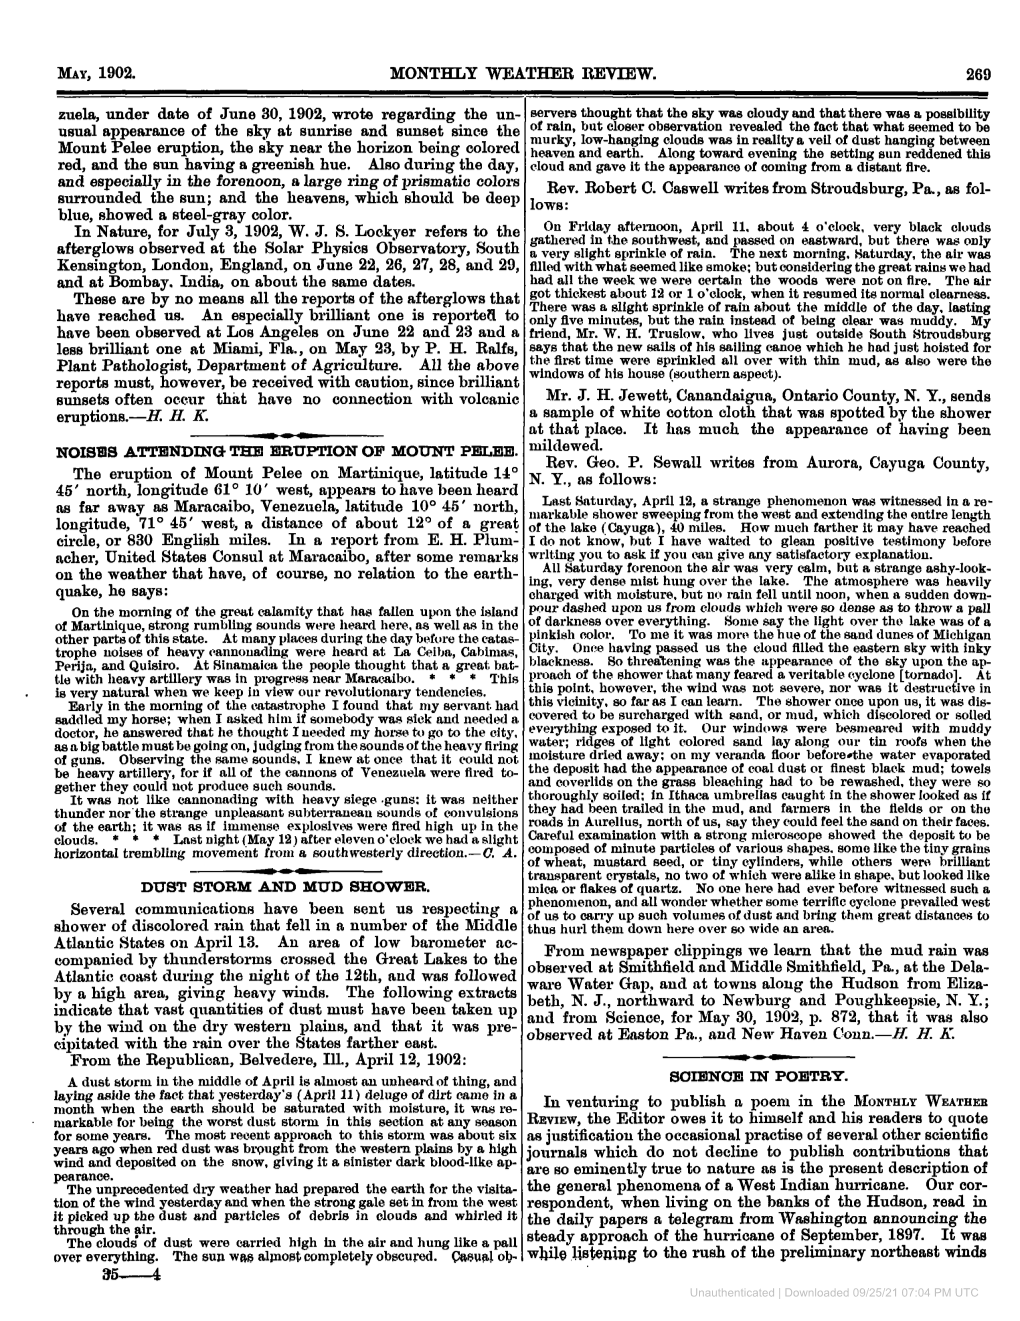 MAY, 1902. MONTHLY WEATHER REVIEW. Zuela